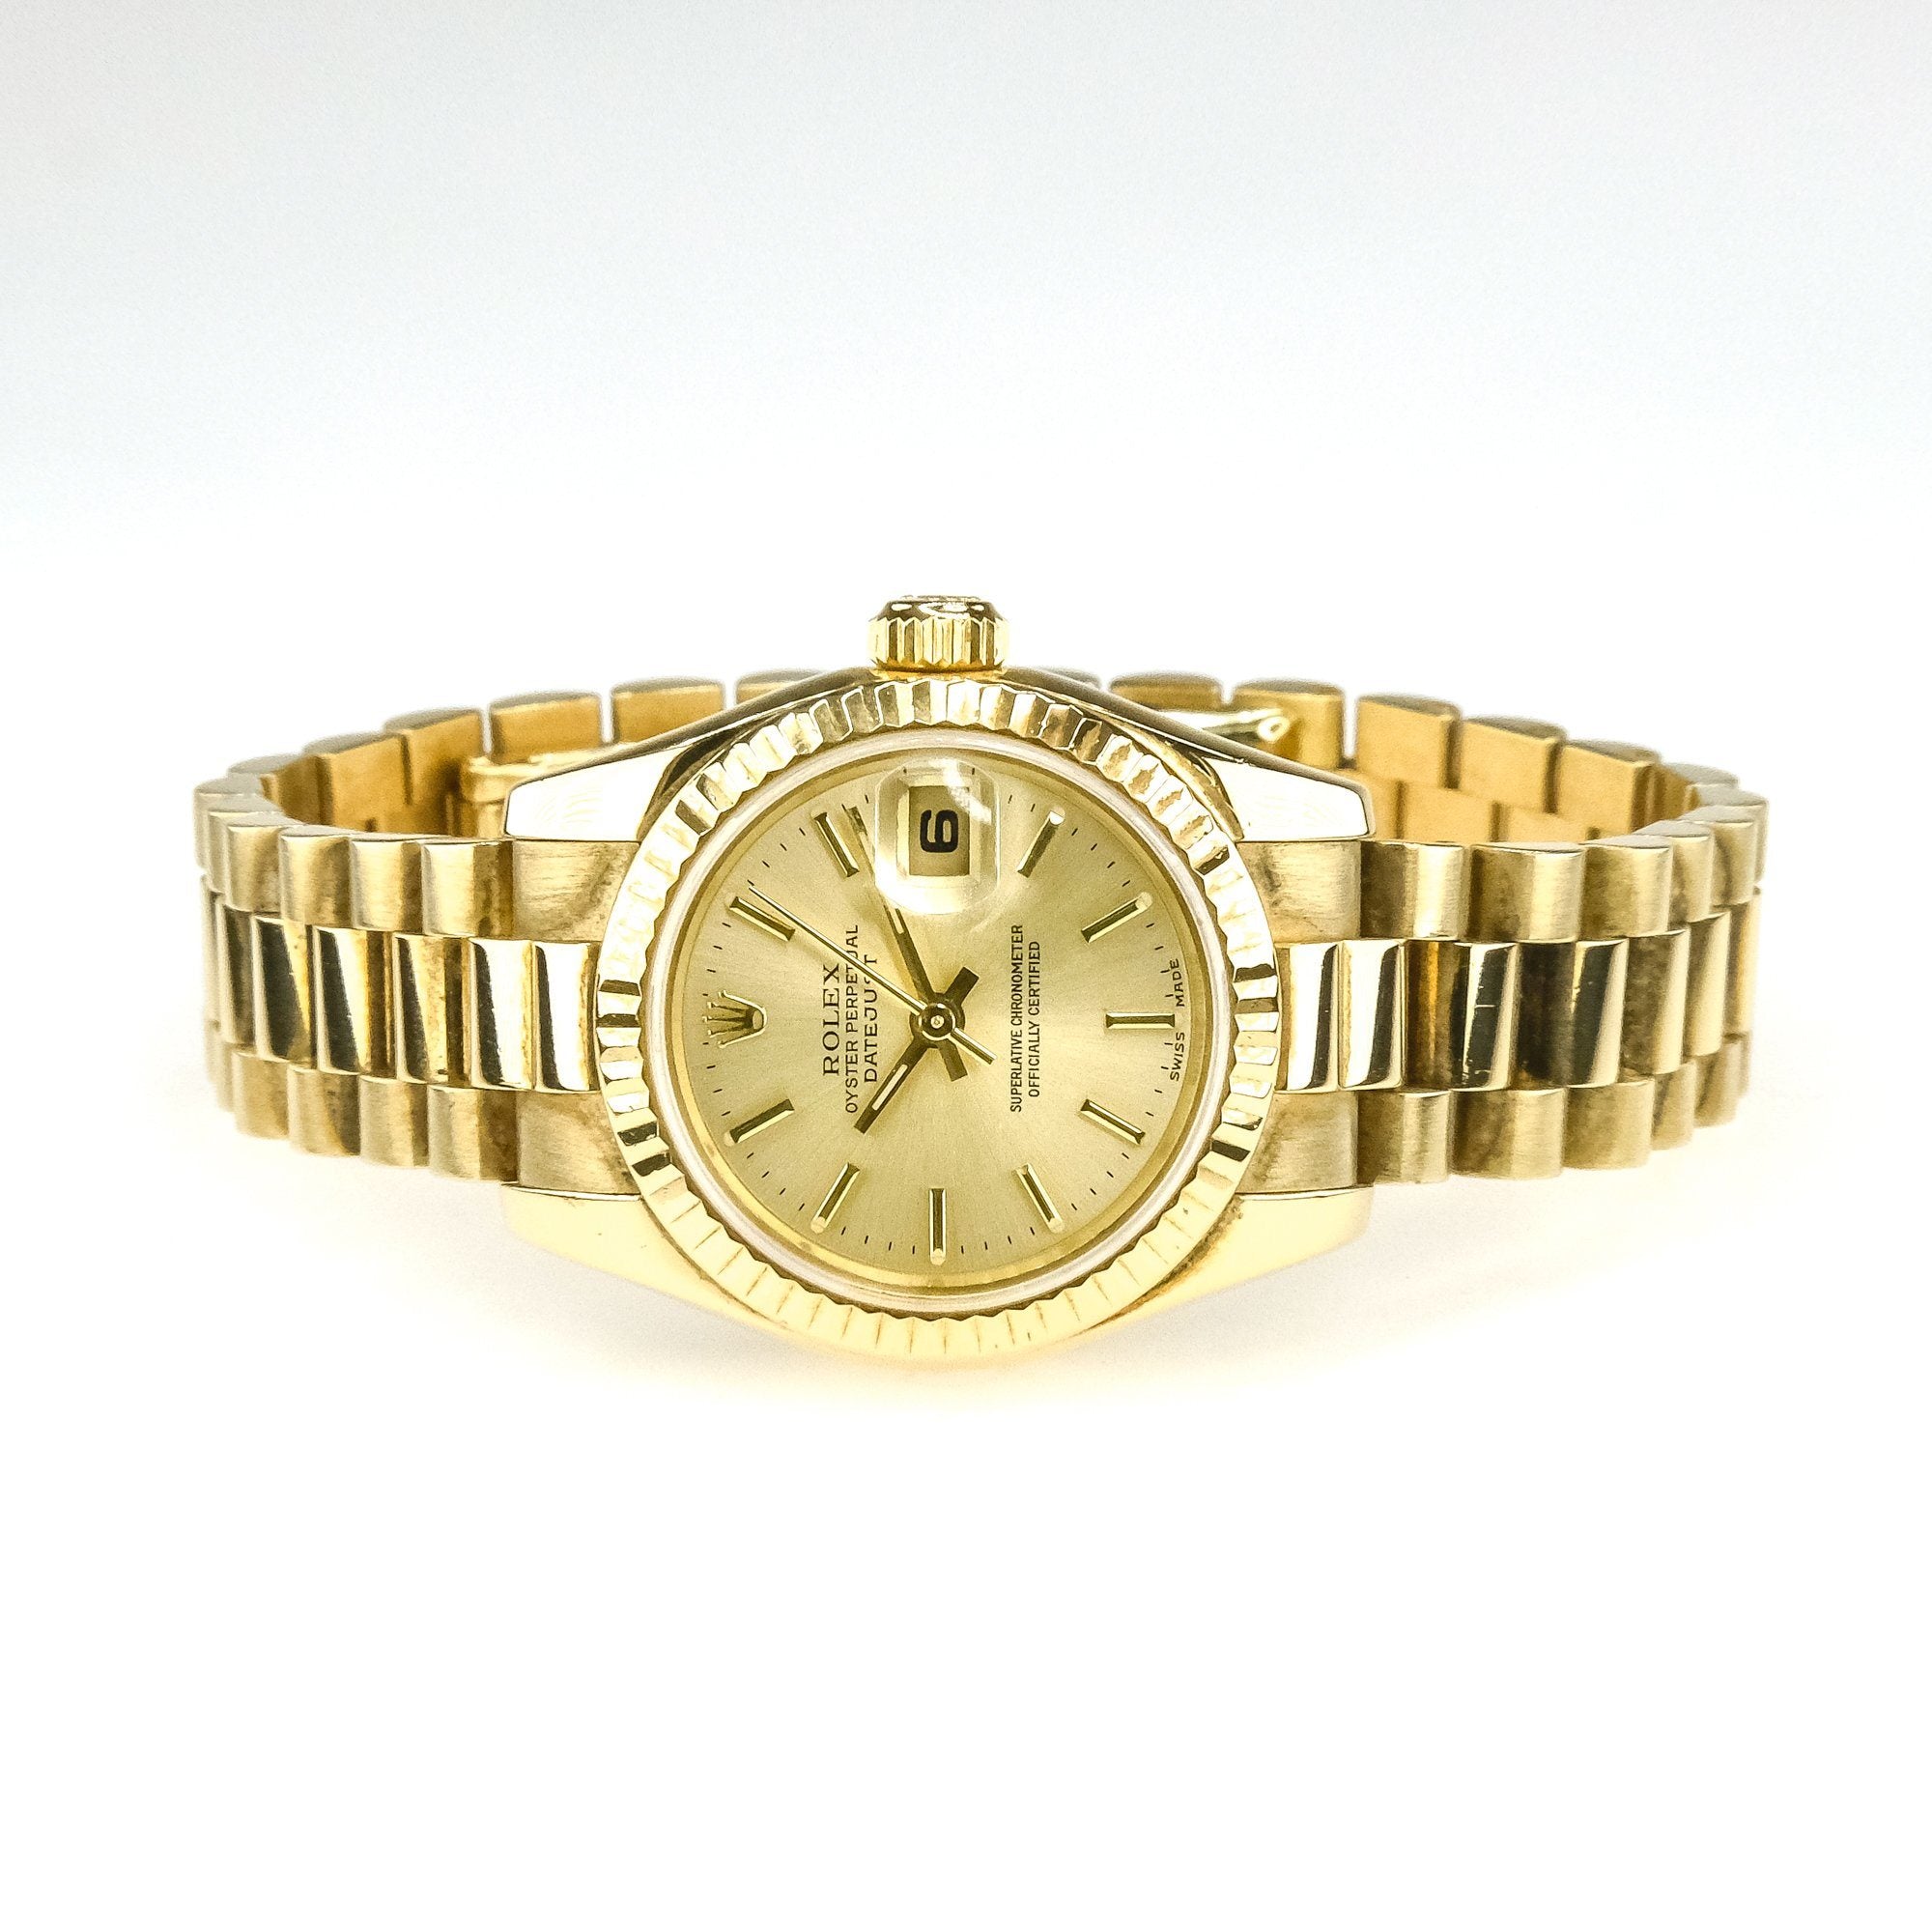 18k rolex oyster perpetual datejust with diamonds